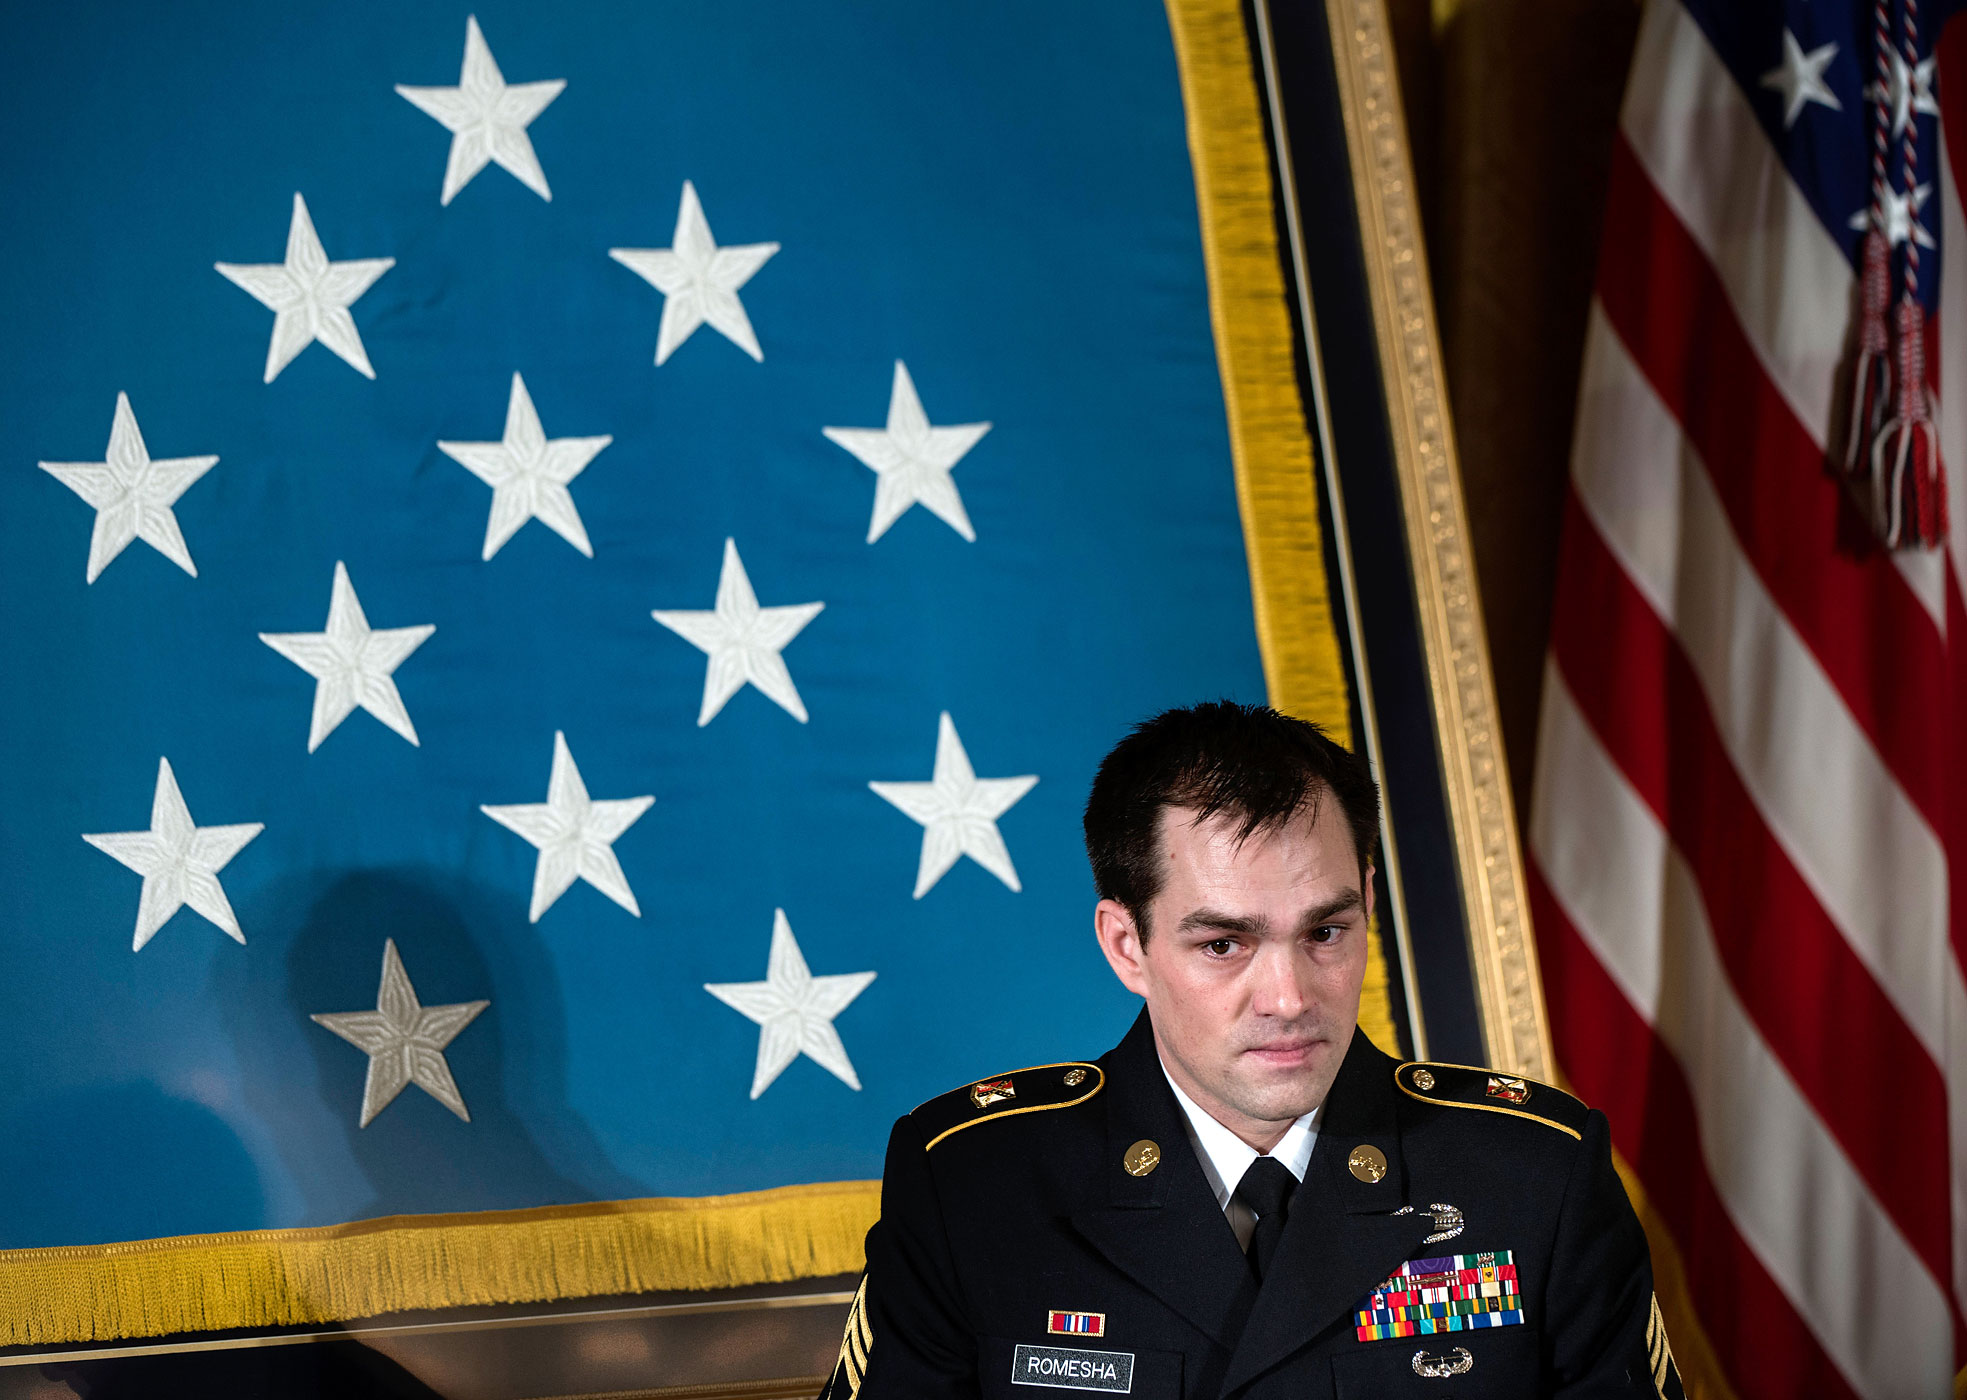 Army Staff Sargent Clinton Romesha listens during a Medal of Honor ceremony in the East Room of the White House in Washington, Feb. 11, 2013.